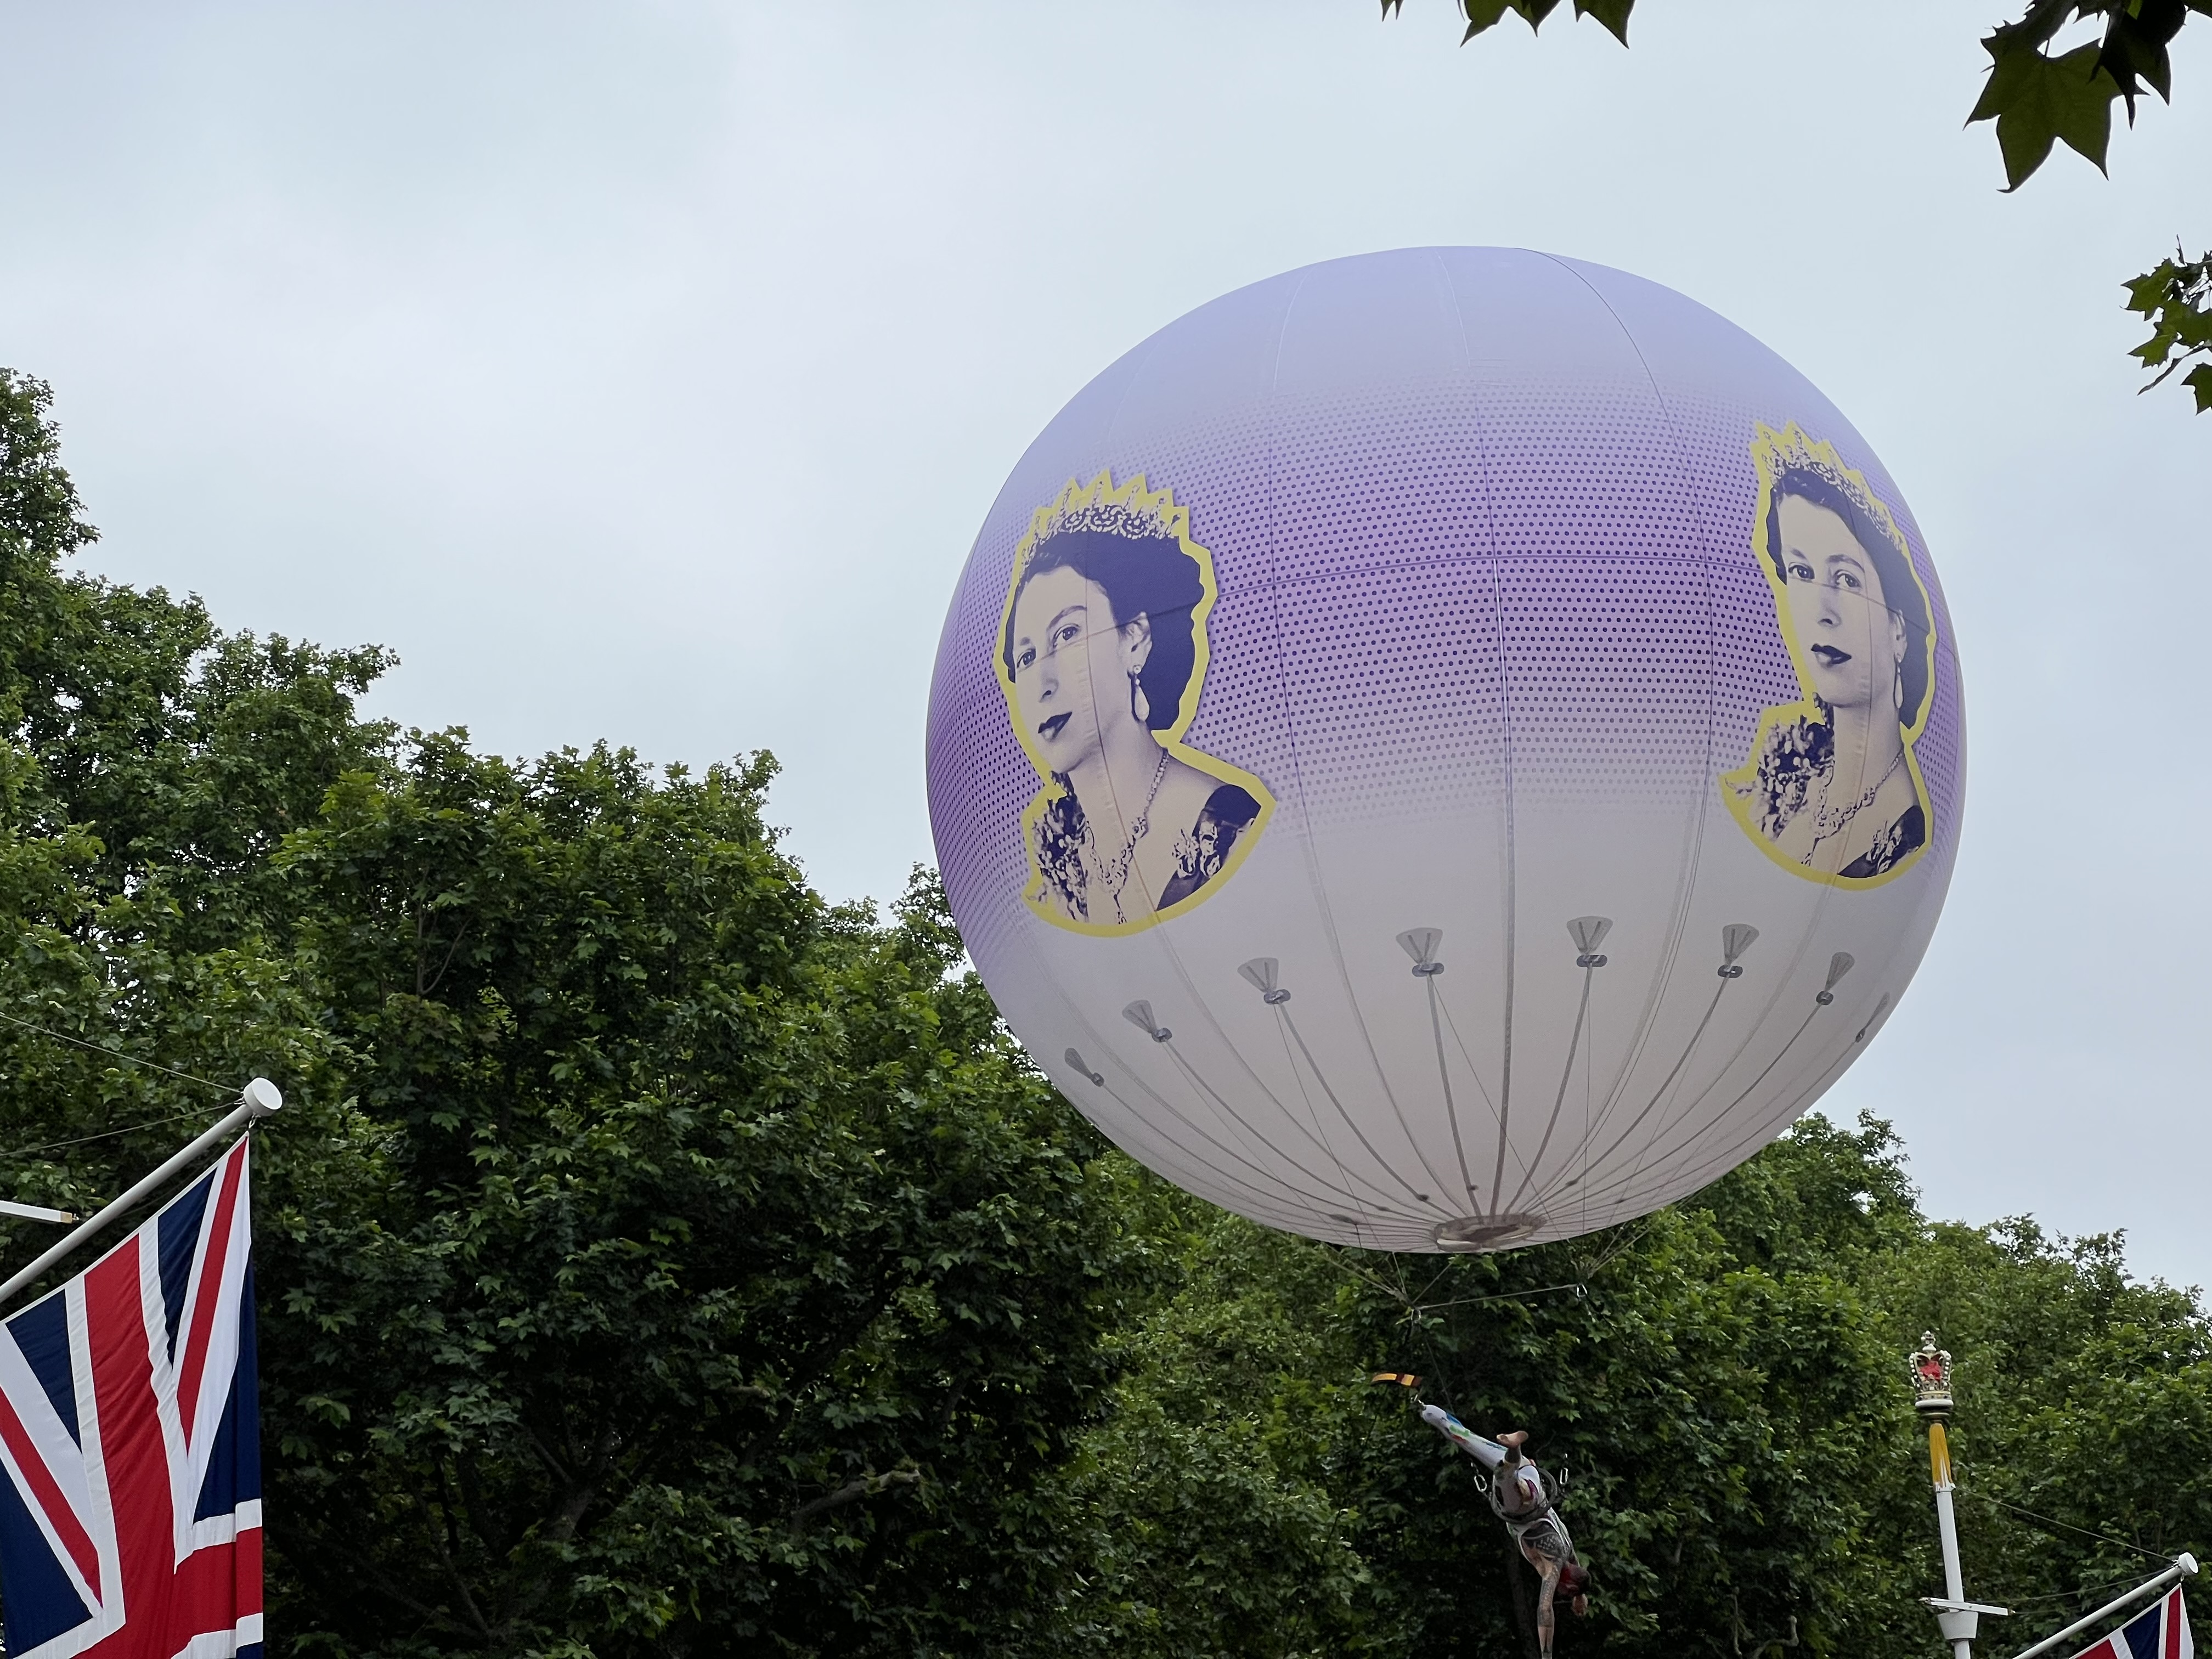 Platinum Jubilee Pageant - The Queen's Baloon